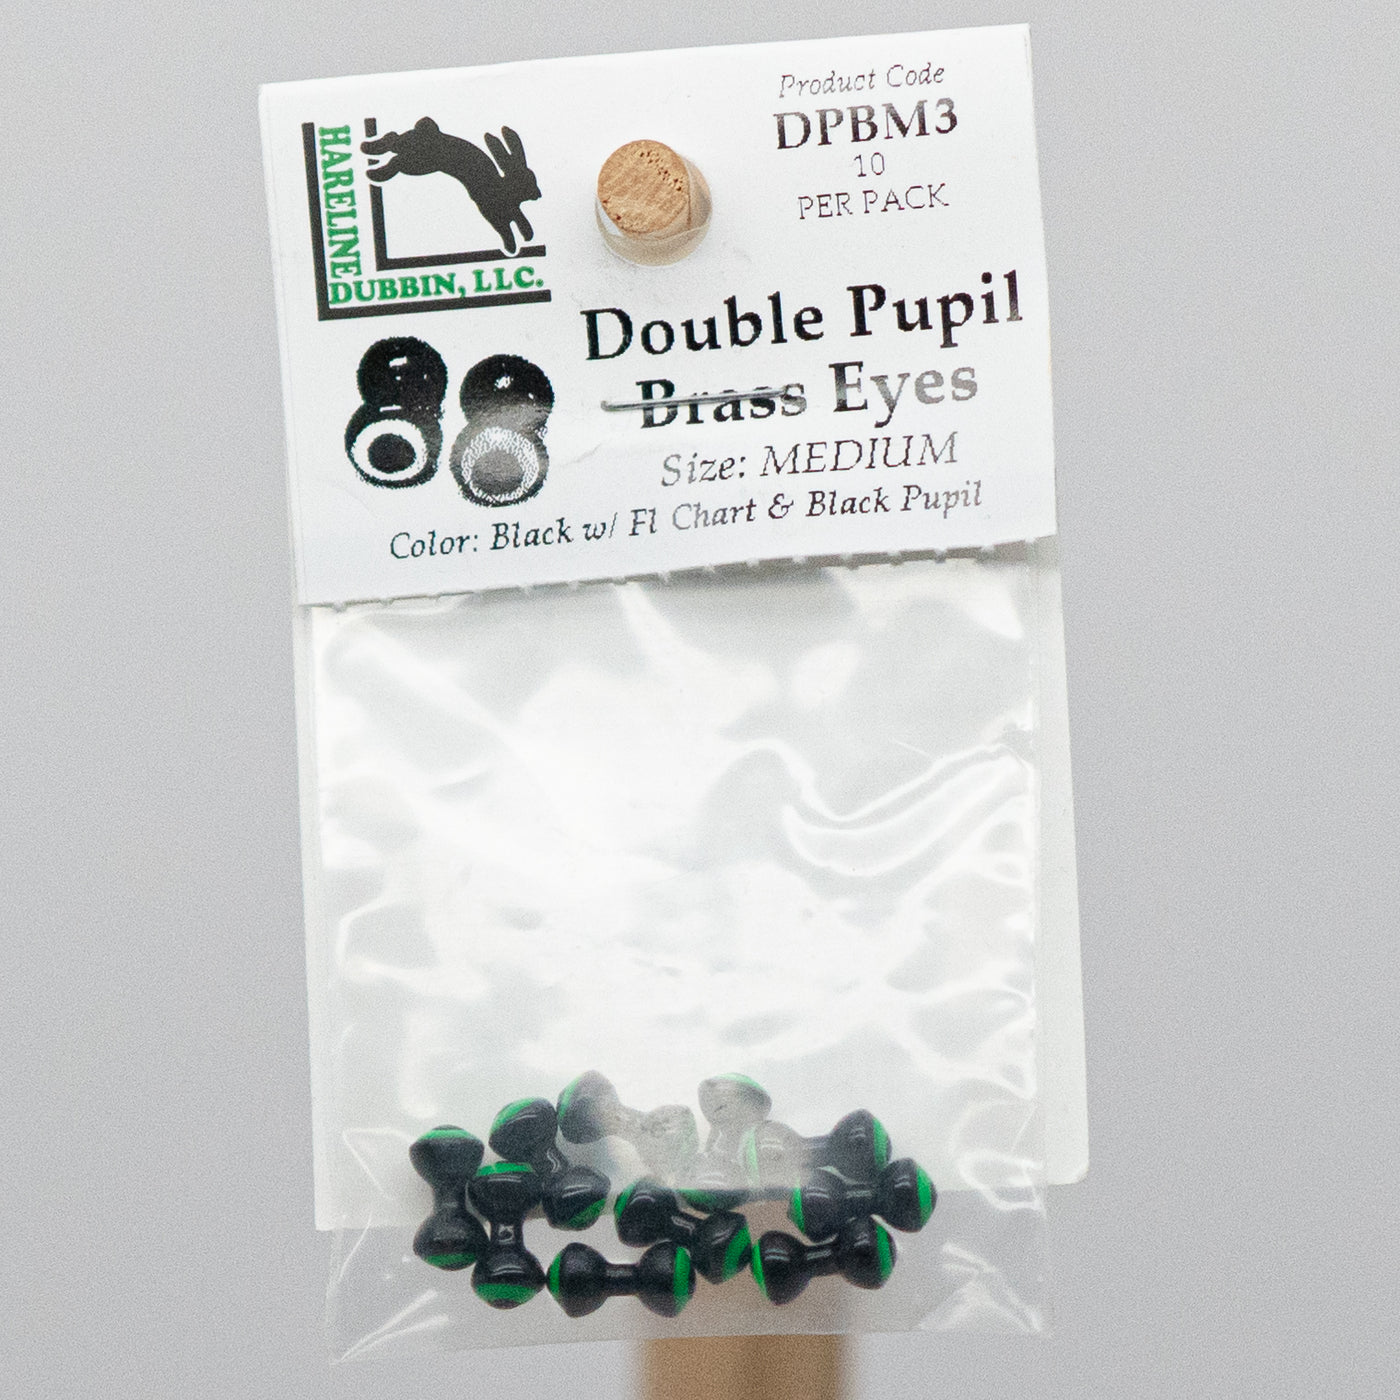 DOUBLE PUPIL BRASS EYES - 2 sizes with 10 color options